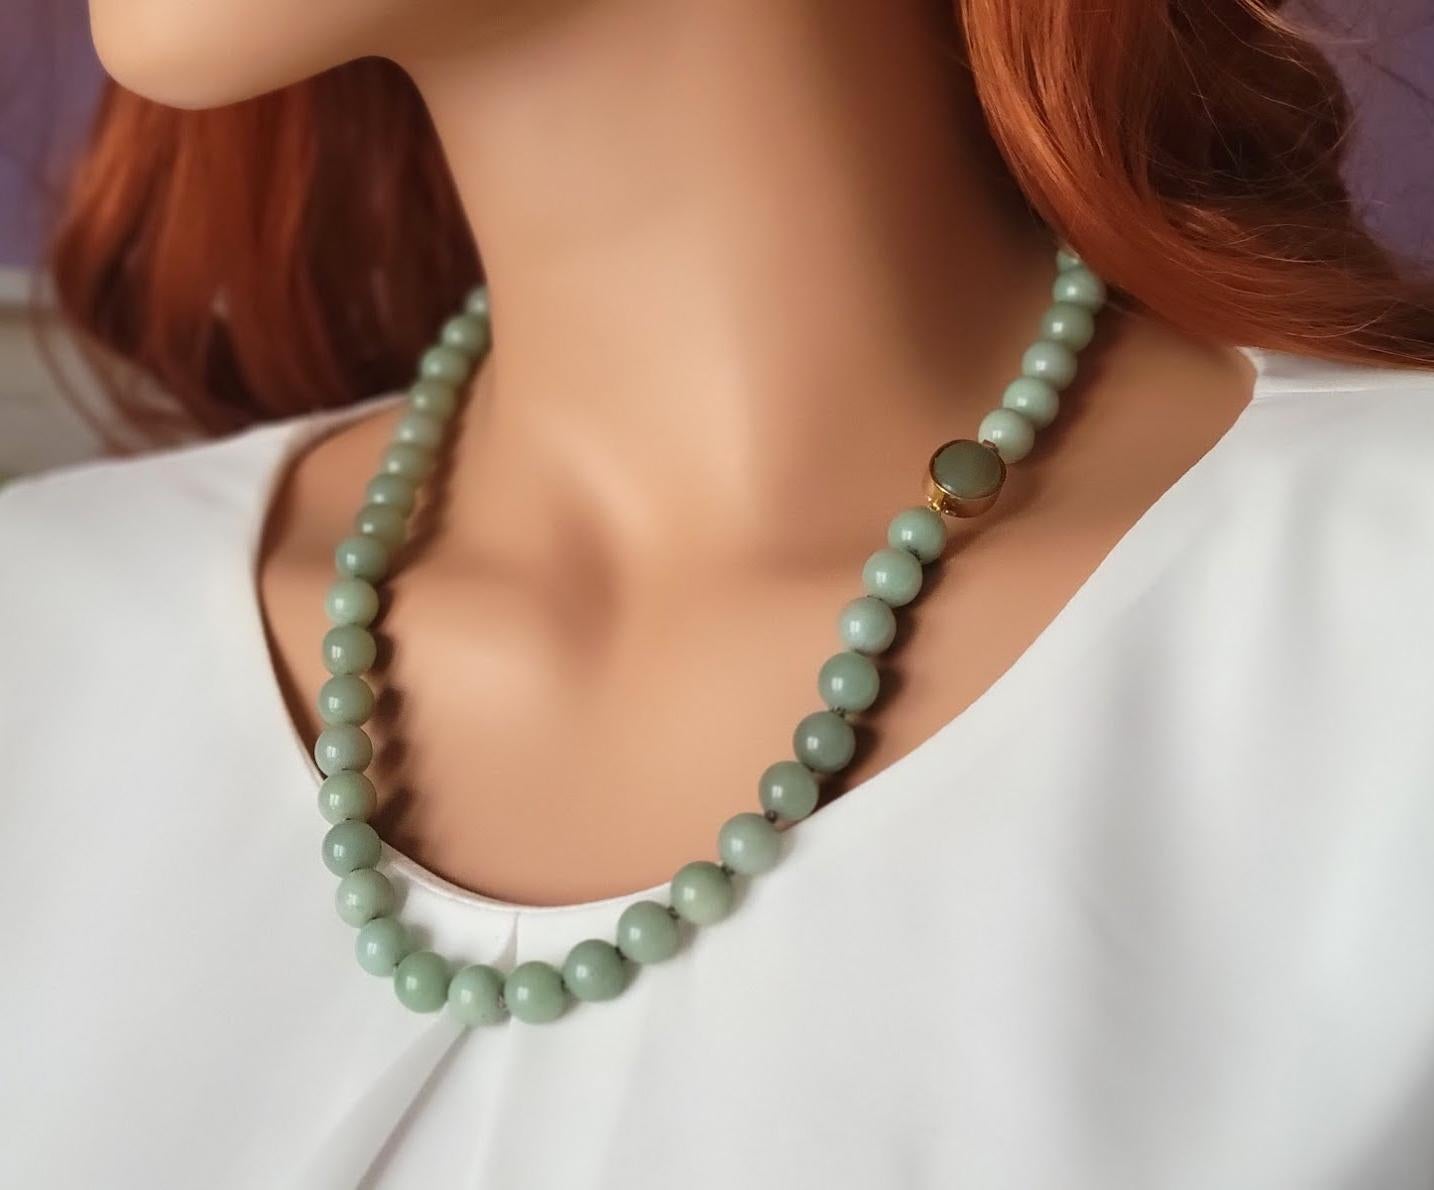 Bead New Zealand Green Inanga Nephrite Necklace For Sale